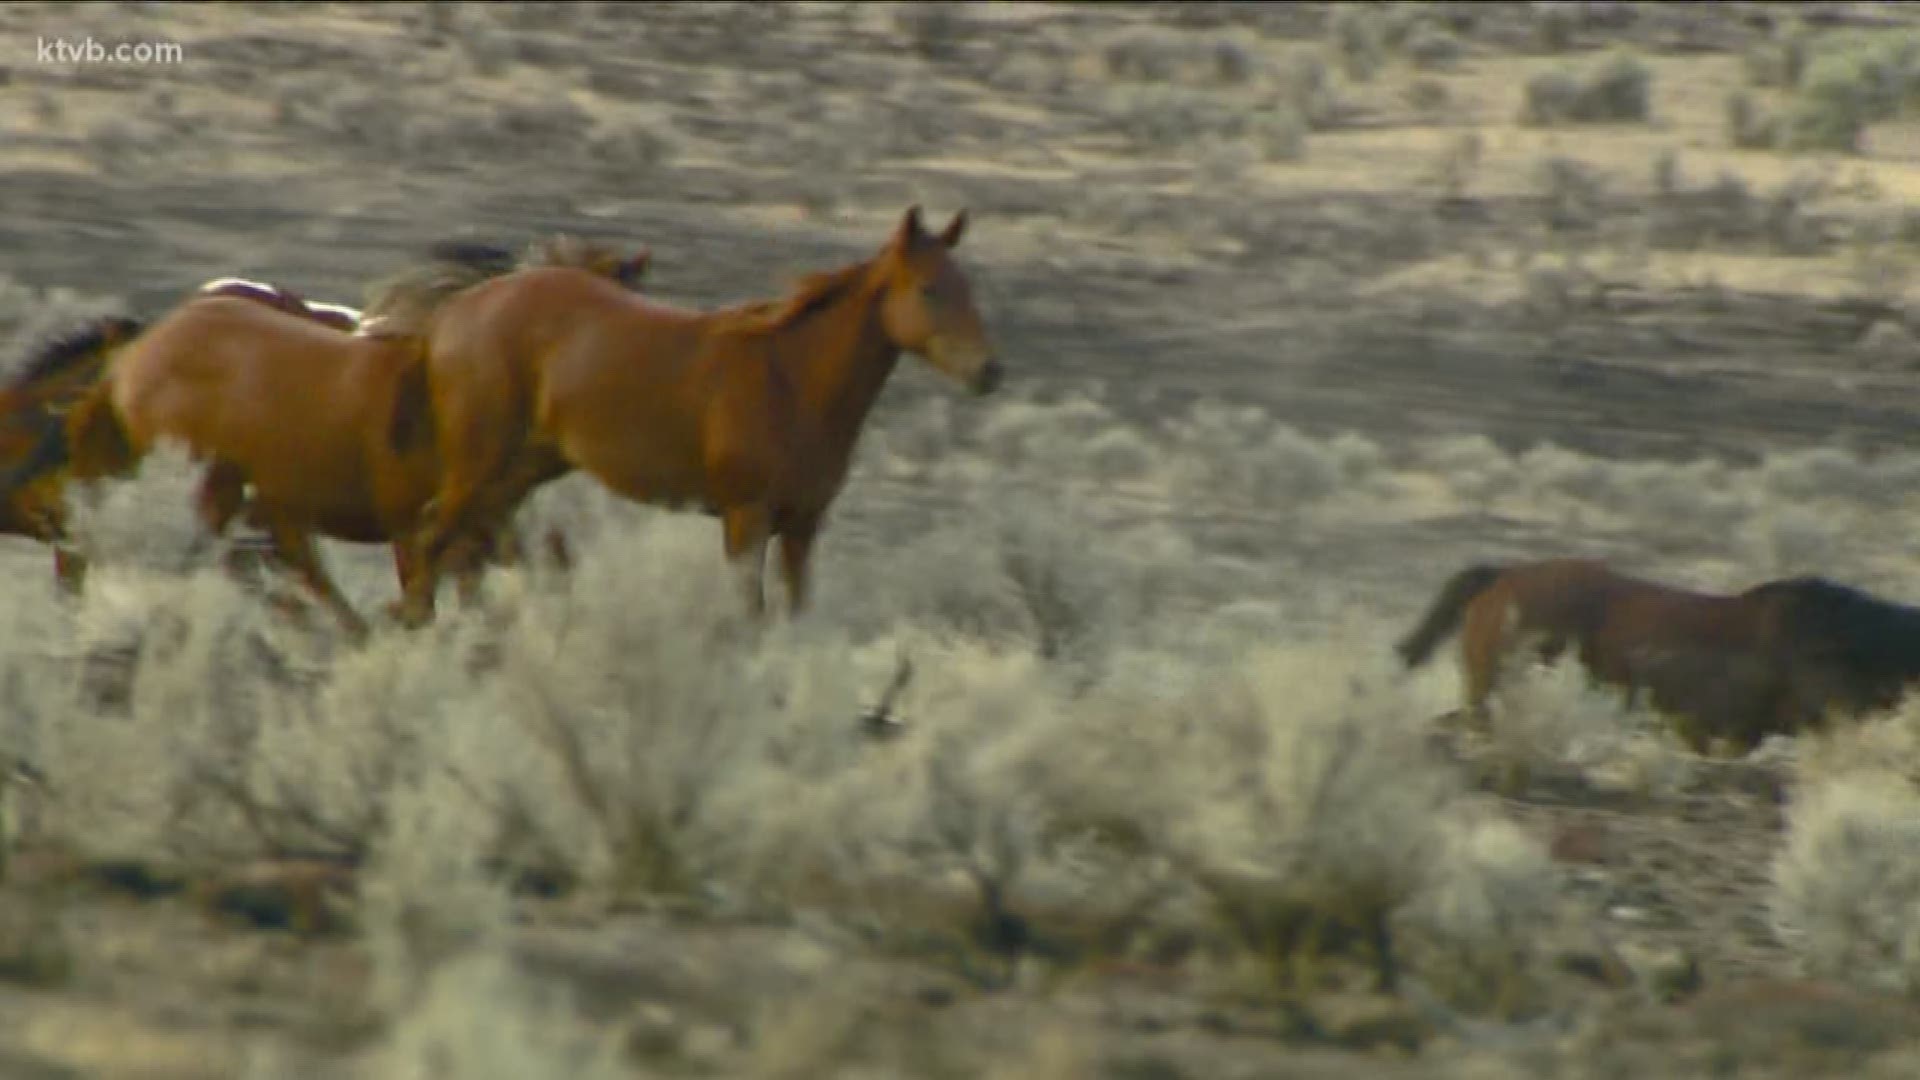 The BLM plans to releases 45 horses back into the wild later this month.